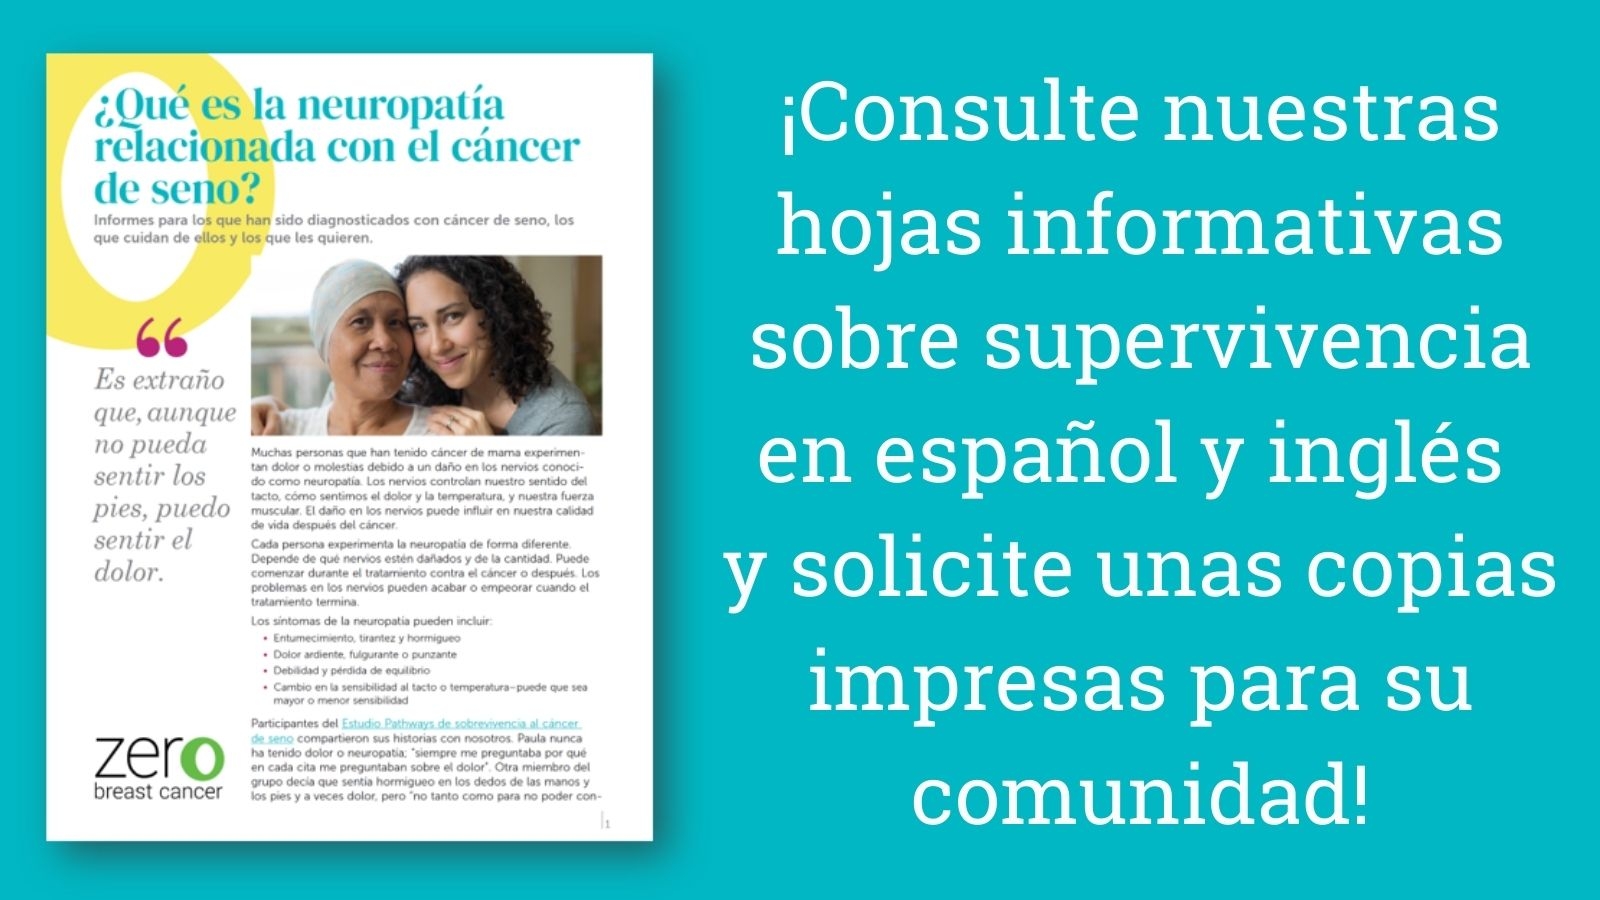 Image of factsheet and Spanish-language text download factsheets in English and Spanish. 